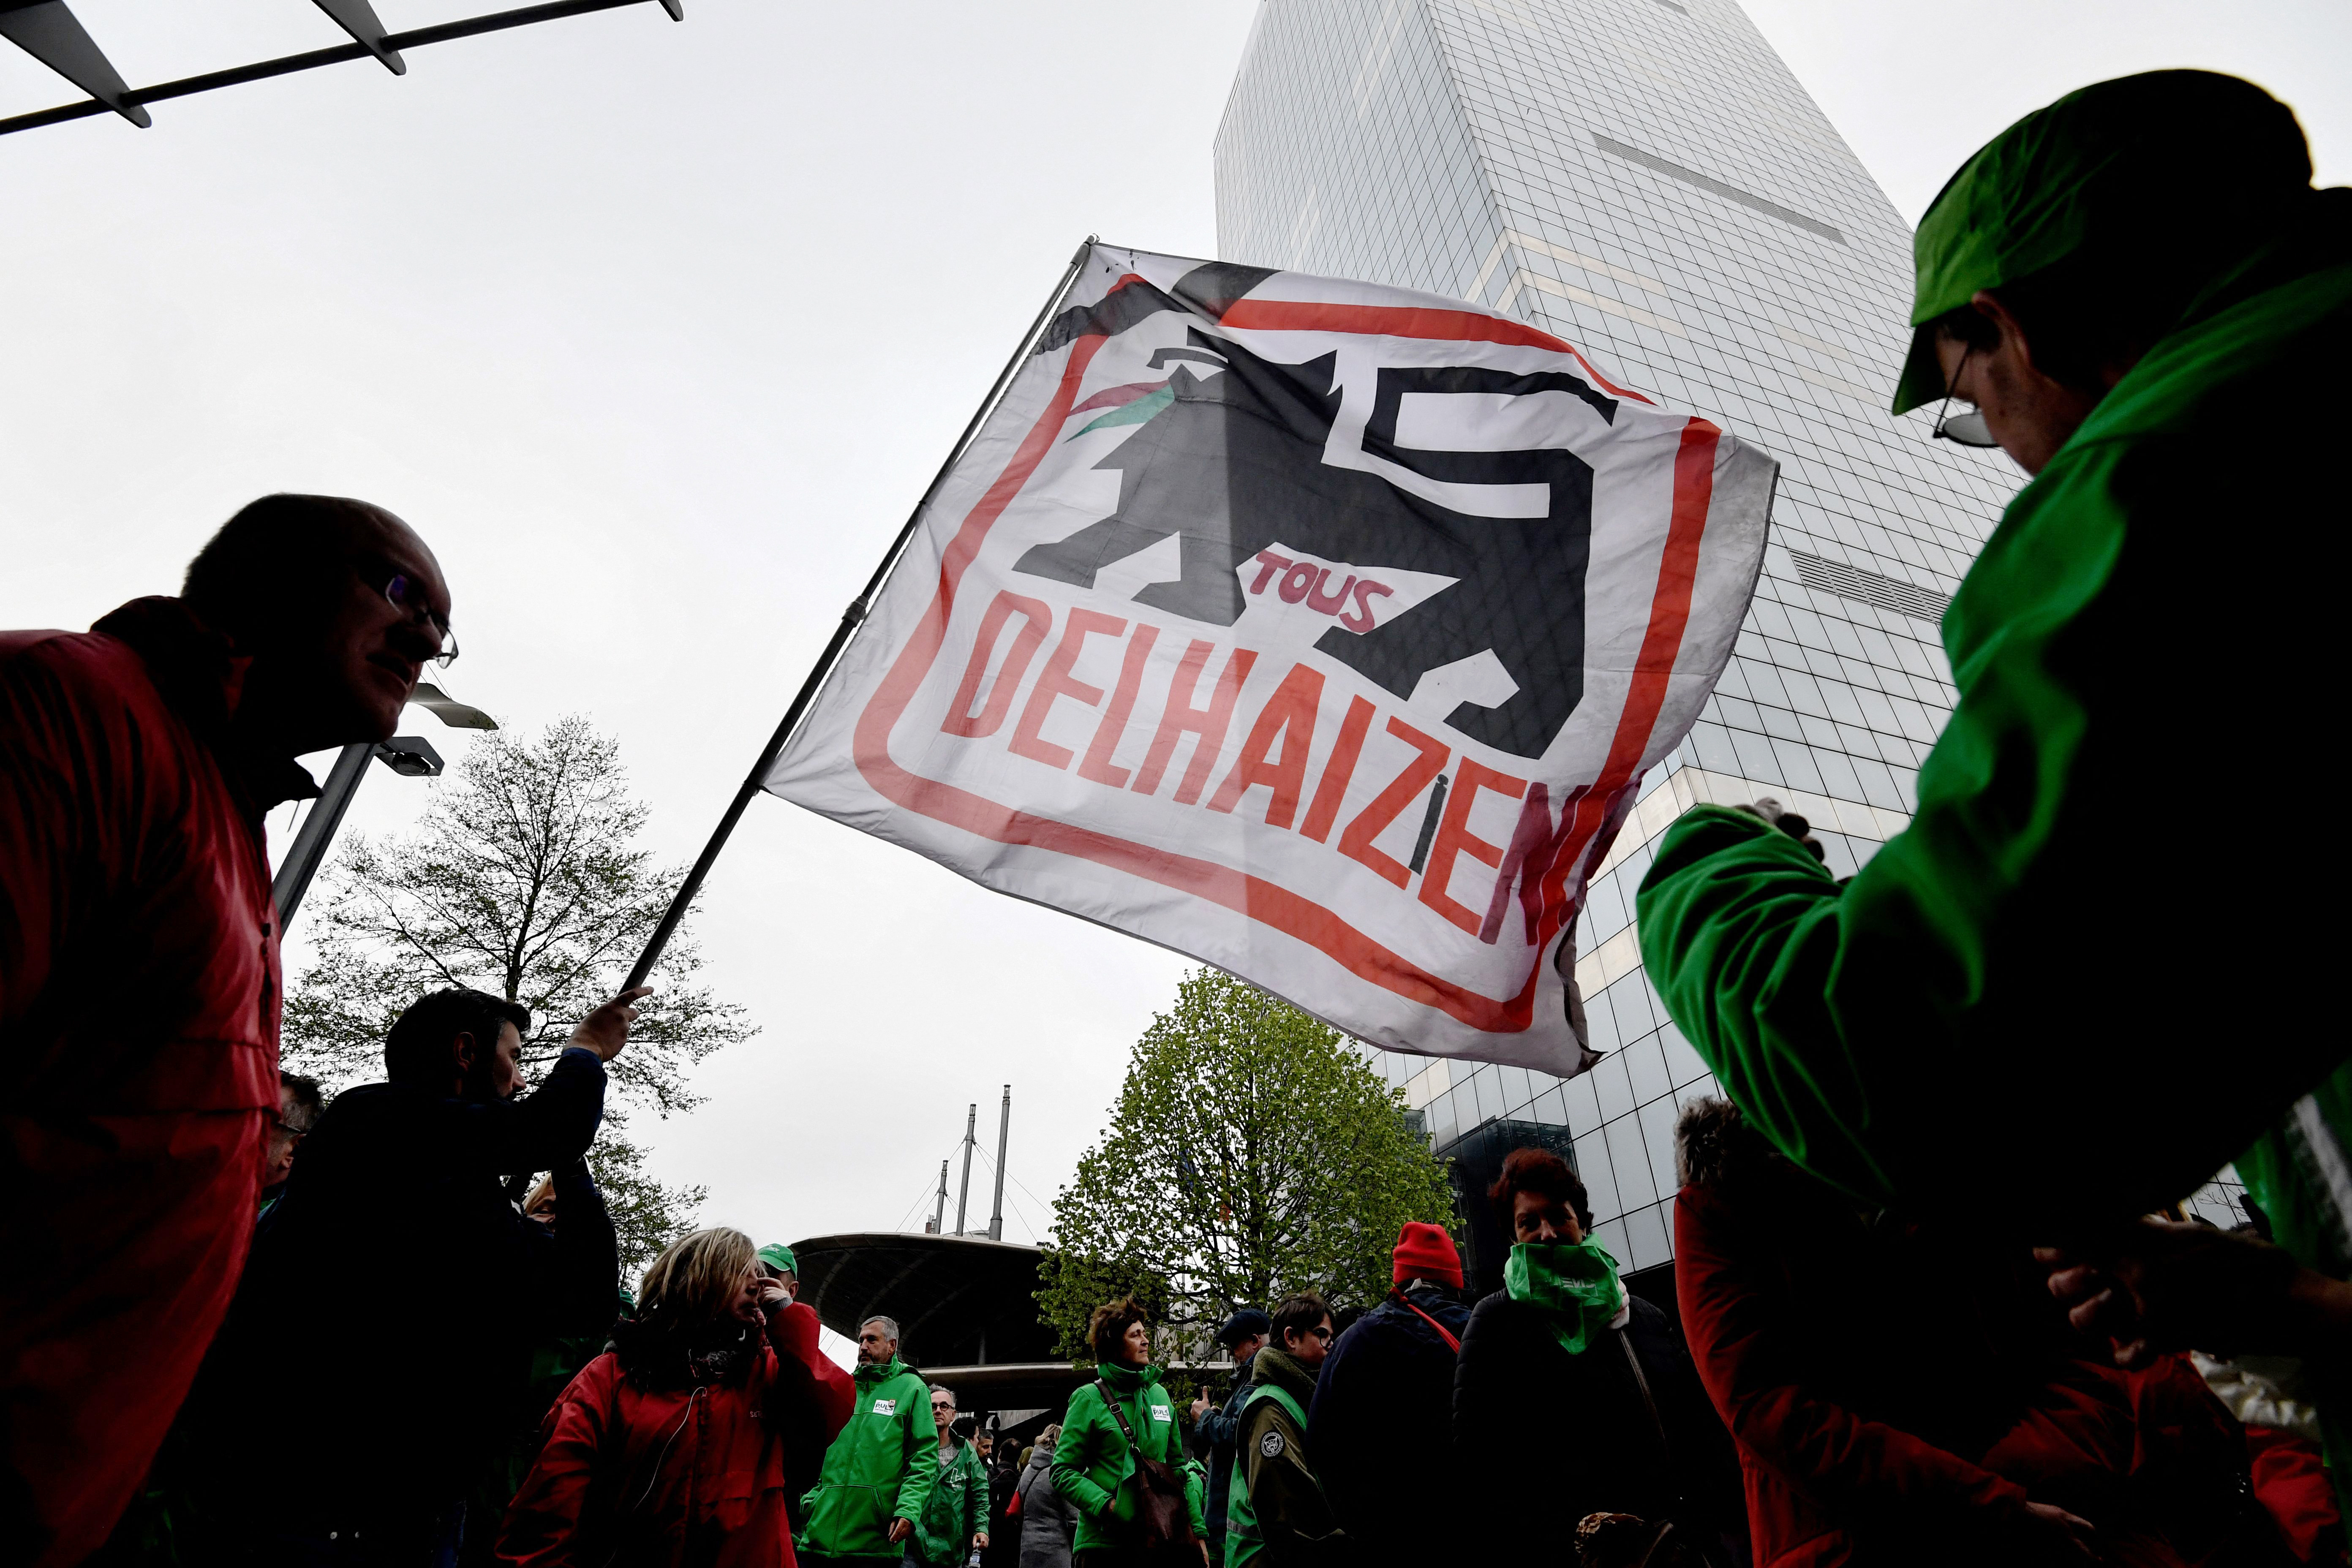 Protestors hold a flag of the Belgium supermarket group Delhaize during demonstrations against 'social dumping' in Brussels on April 17, 2023. (Photo by JOHN THYS / AFP) (Photo by JOHN THYS/AFP via Getty Images)